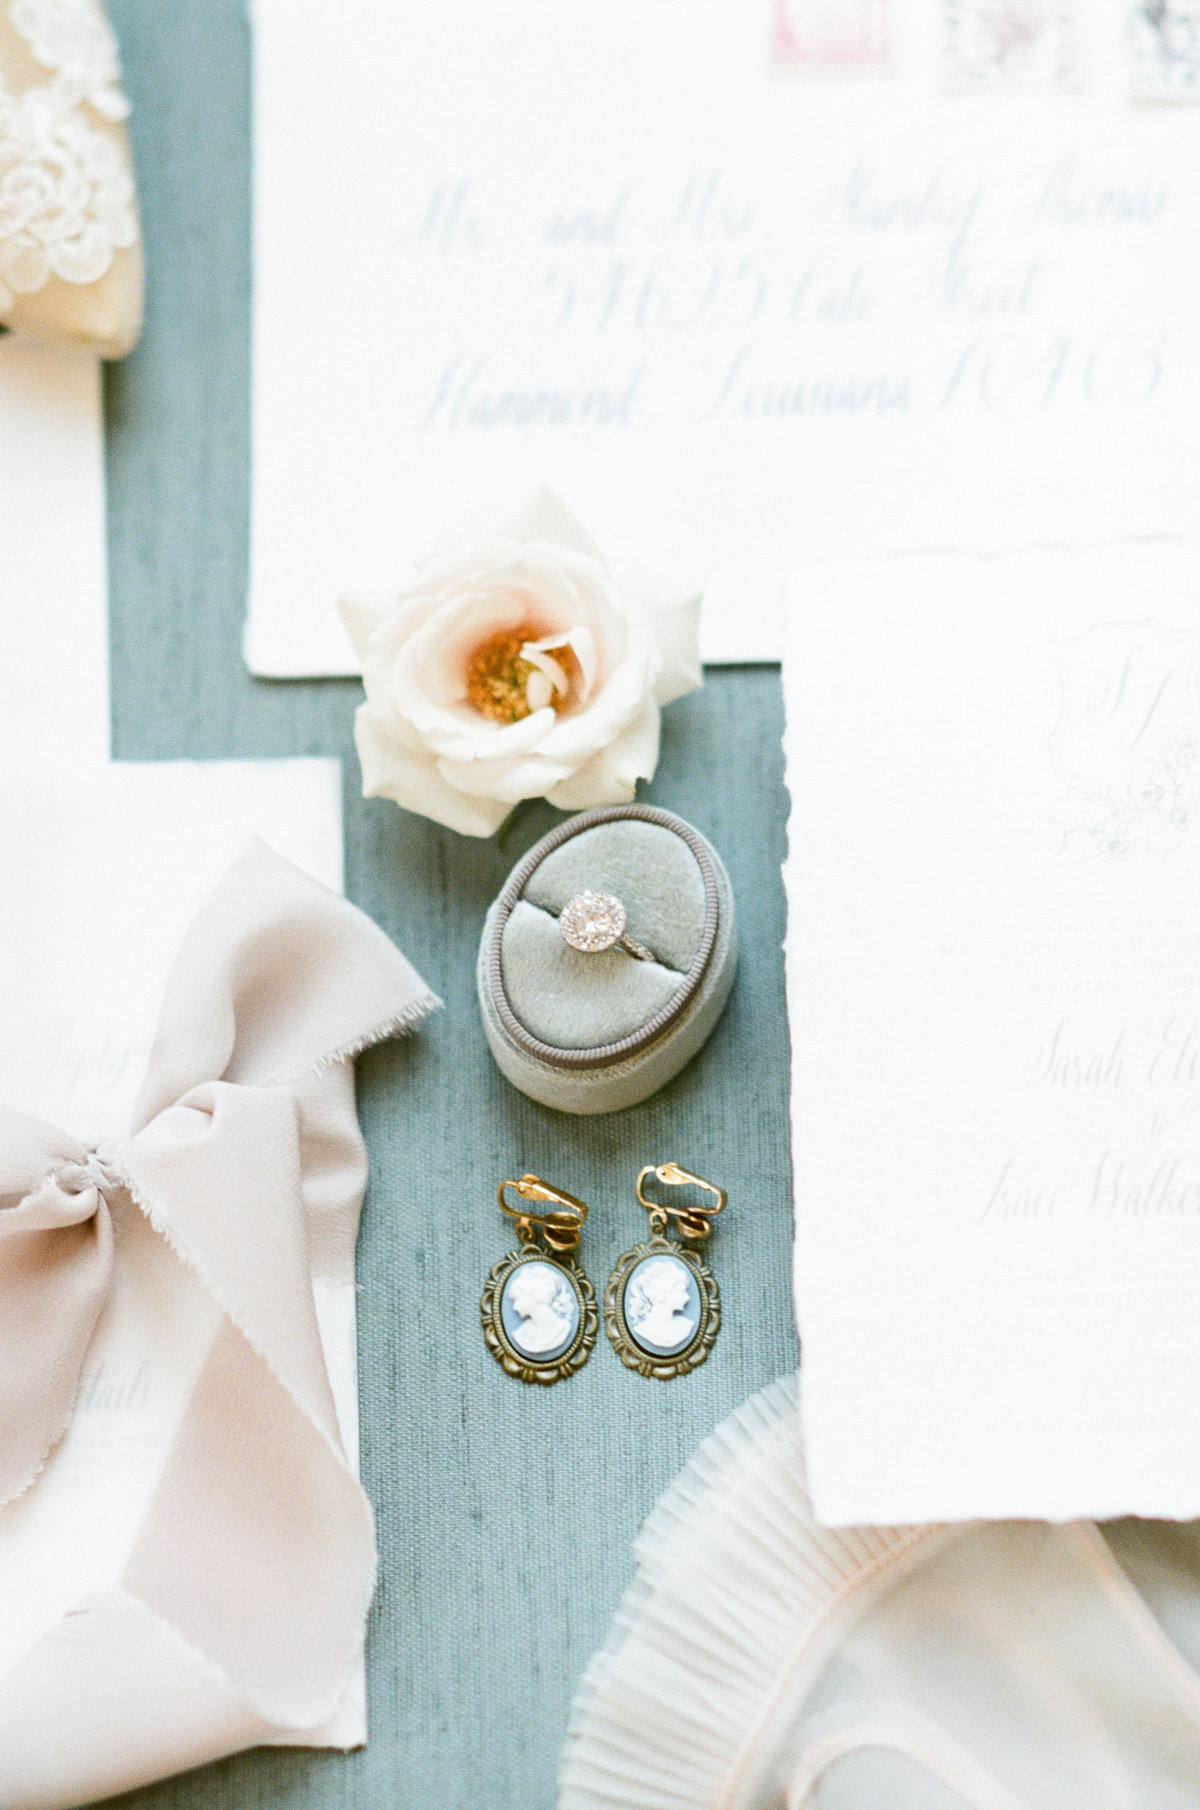 Flatlay of wedding stationery, earrings, and wedding details